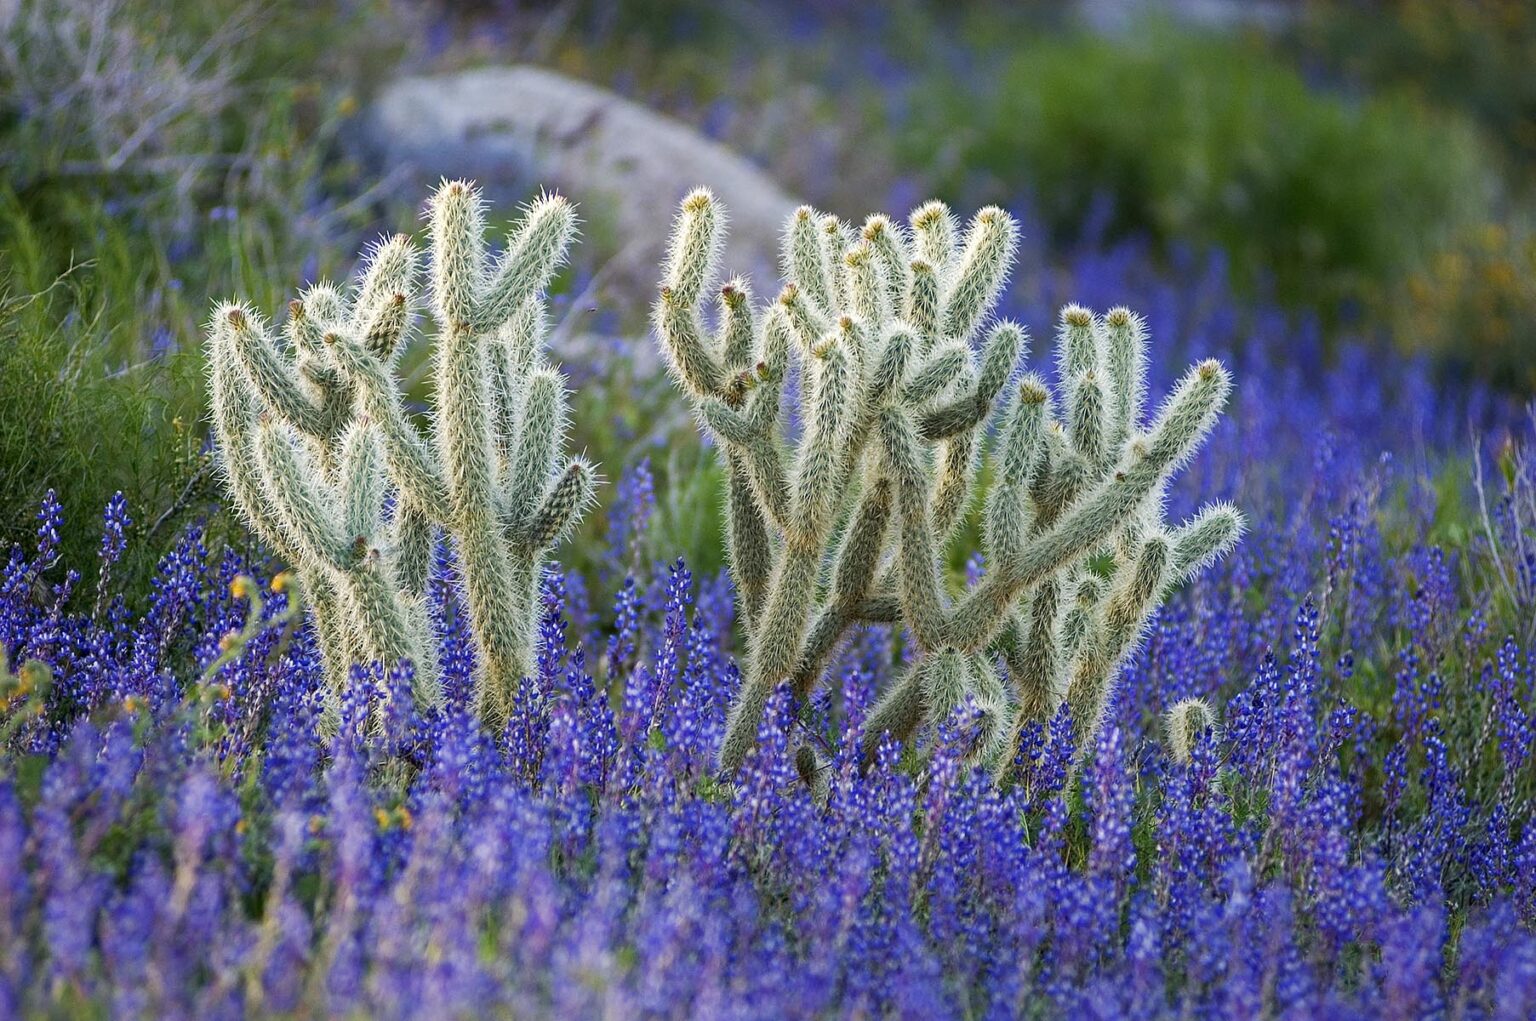 CHOLLA CACTUS & LUPINE at the upper elevations of ANZA BORREGO DESERT STATE PARK, CALIFORNIA